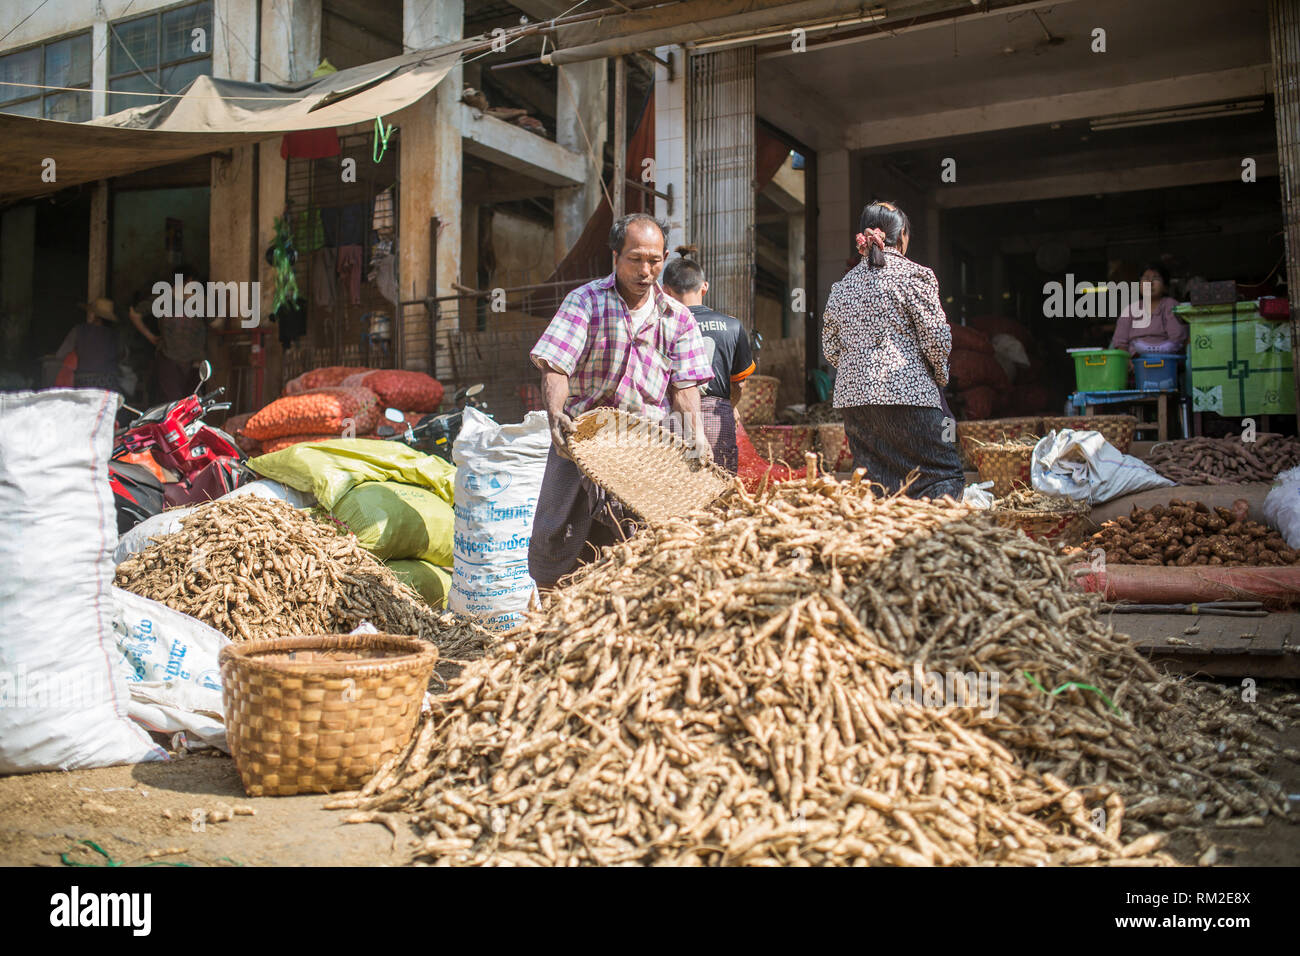 MANDALAY, MYANMAR - JANUARY 13, 2016: Unidentified people working at the market in Mandalay , Myanmar on January 13, 2016 Stock Photo